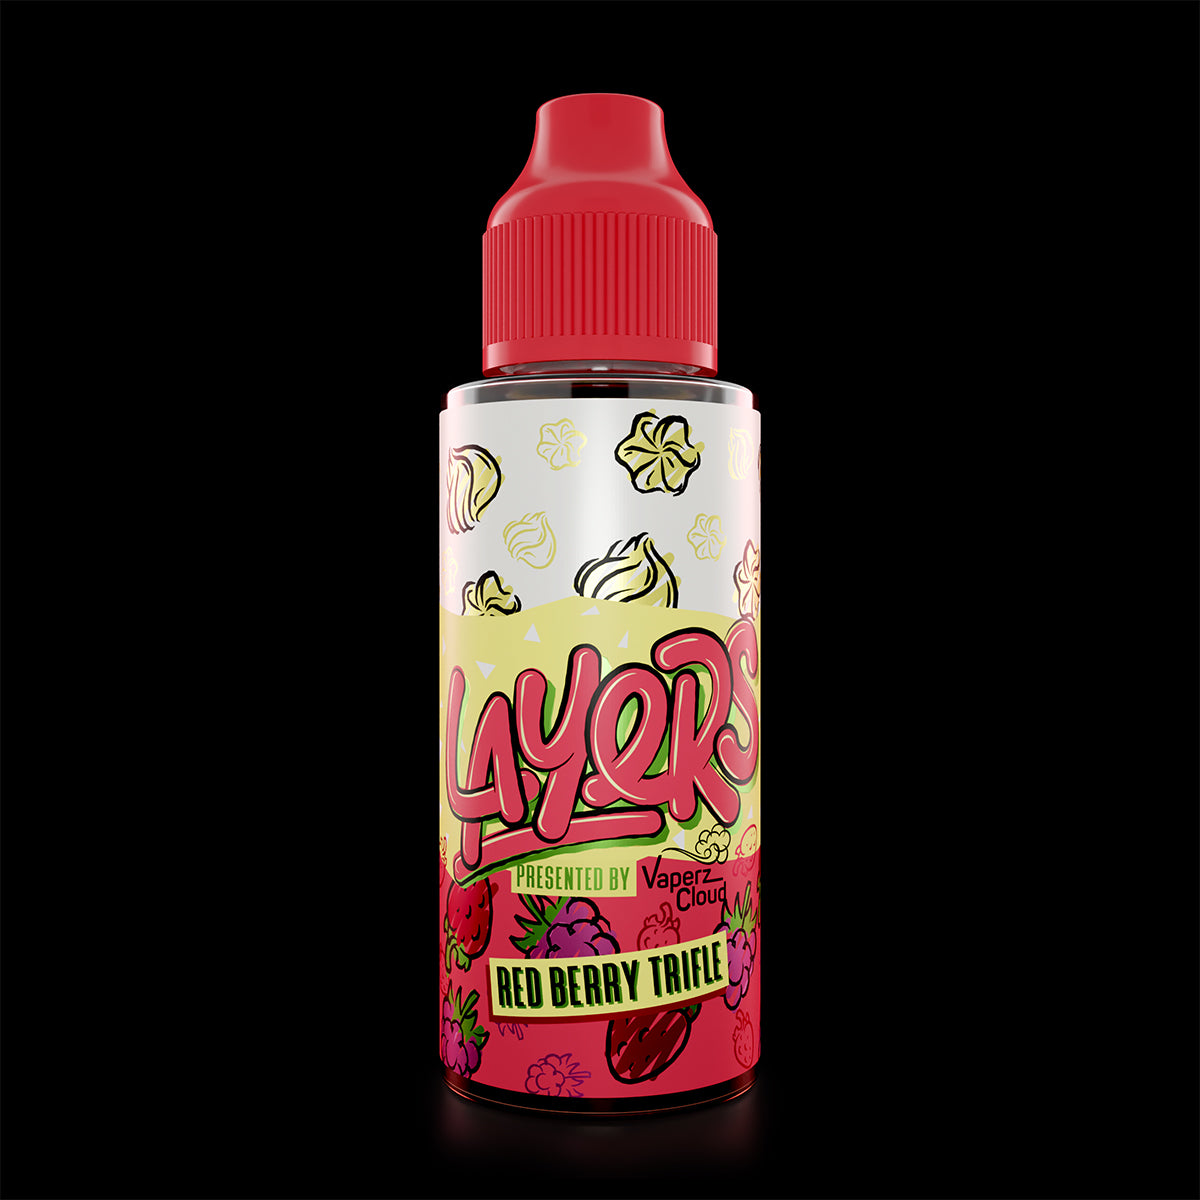 Layers: Red Berry Trifle (100ml)